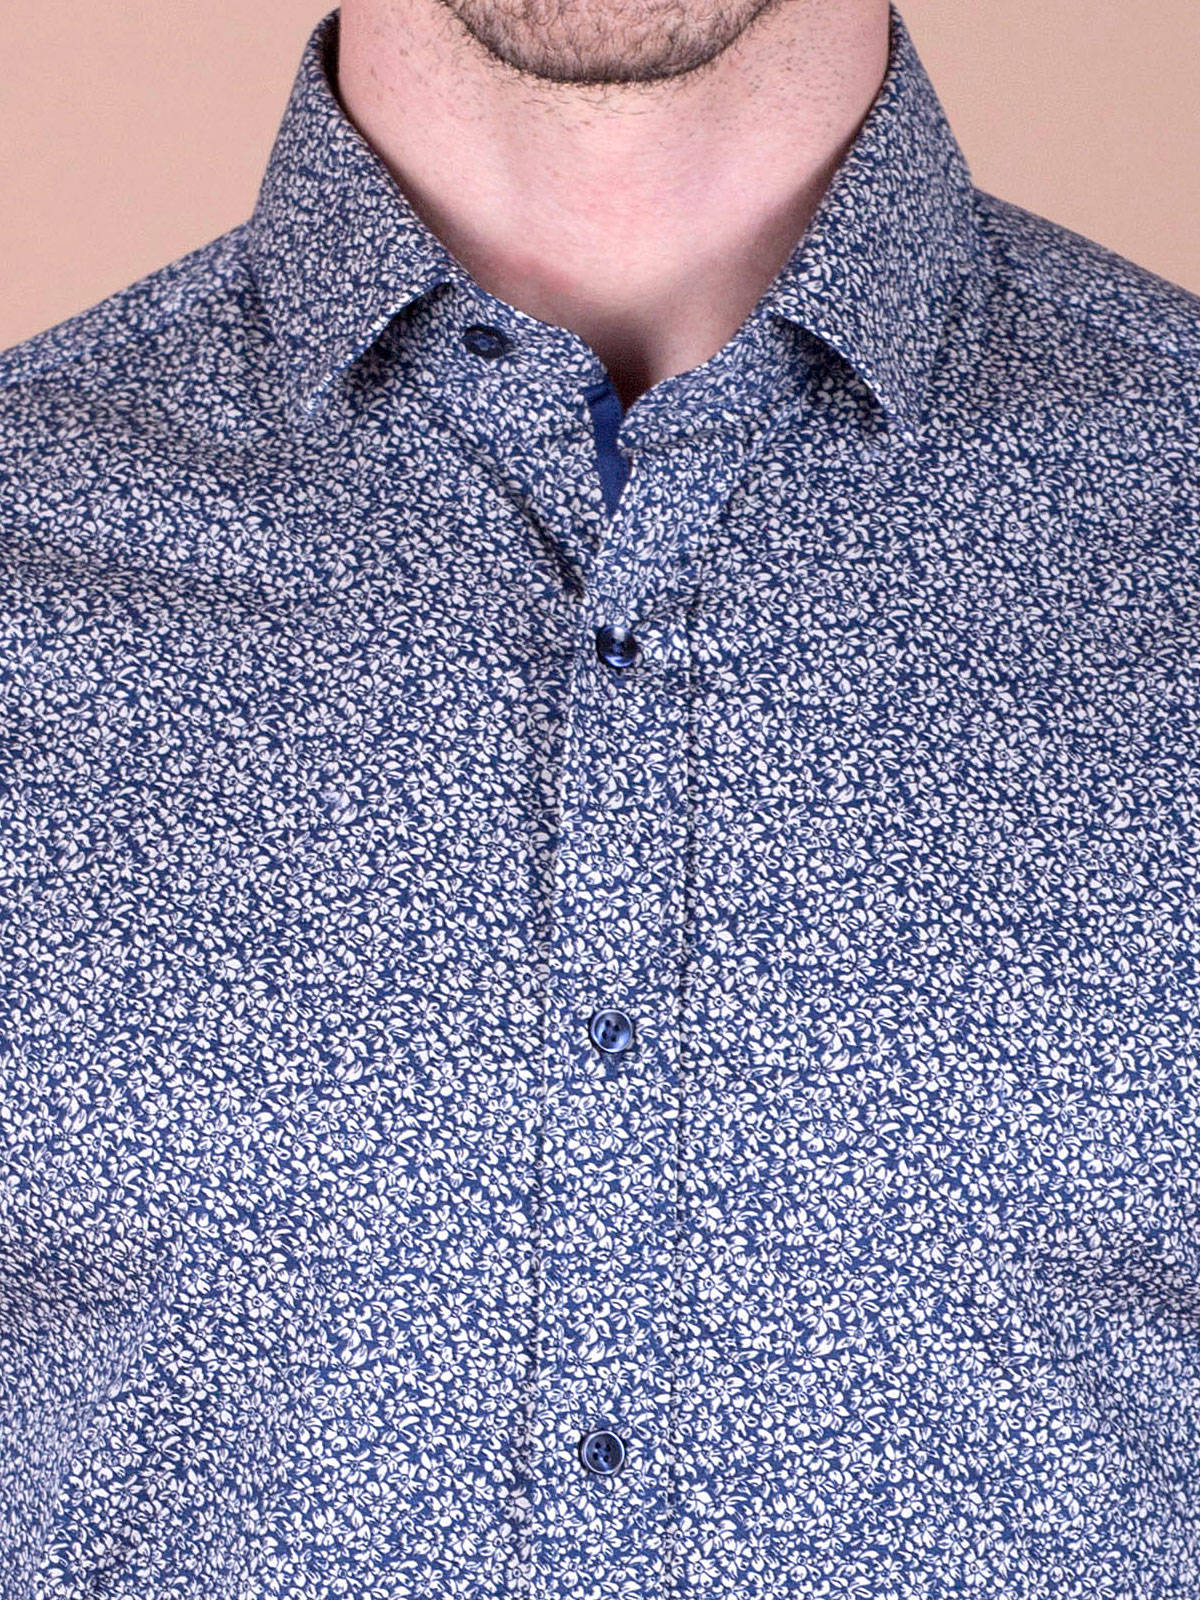  blue shirt with tiny white flowers  - 21391 € 27.00 img3